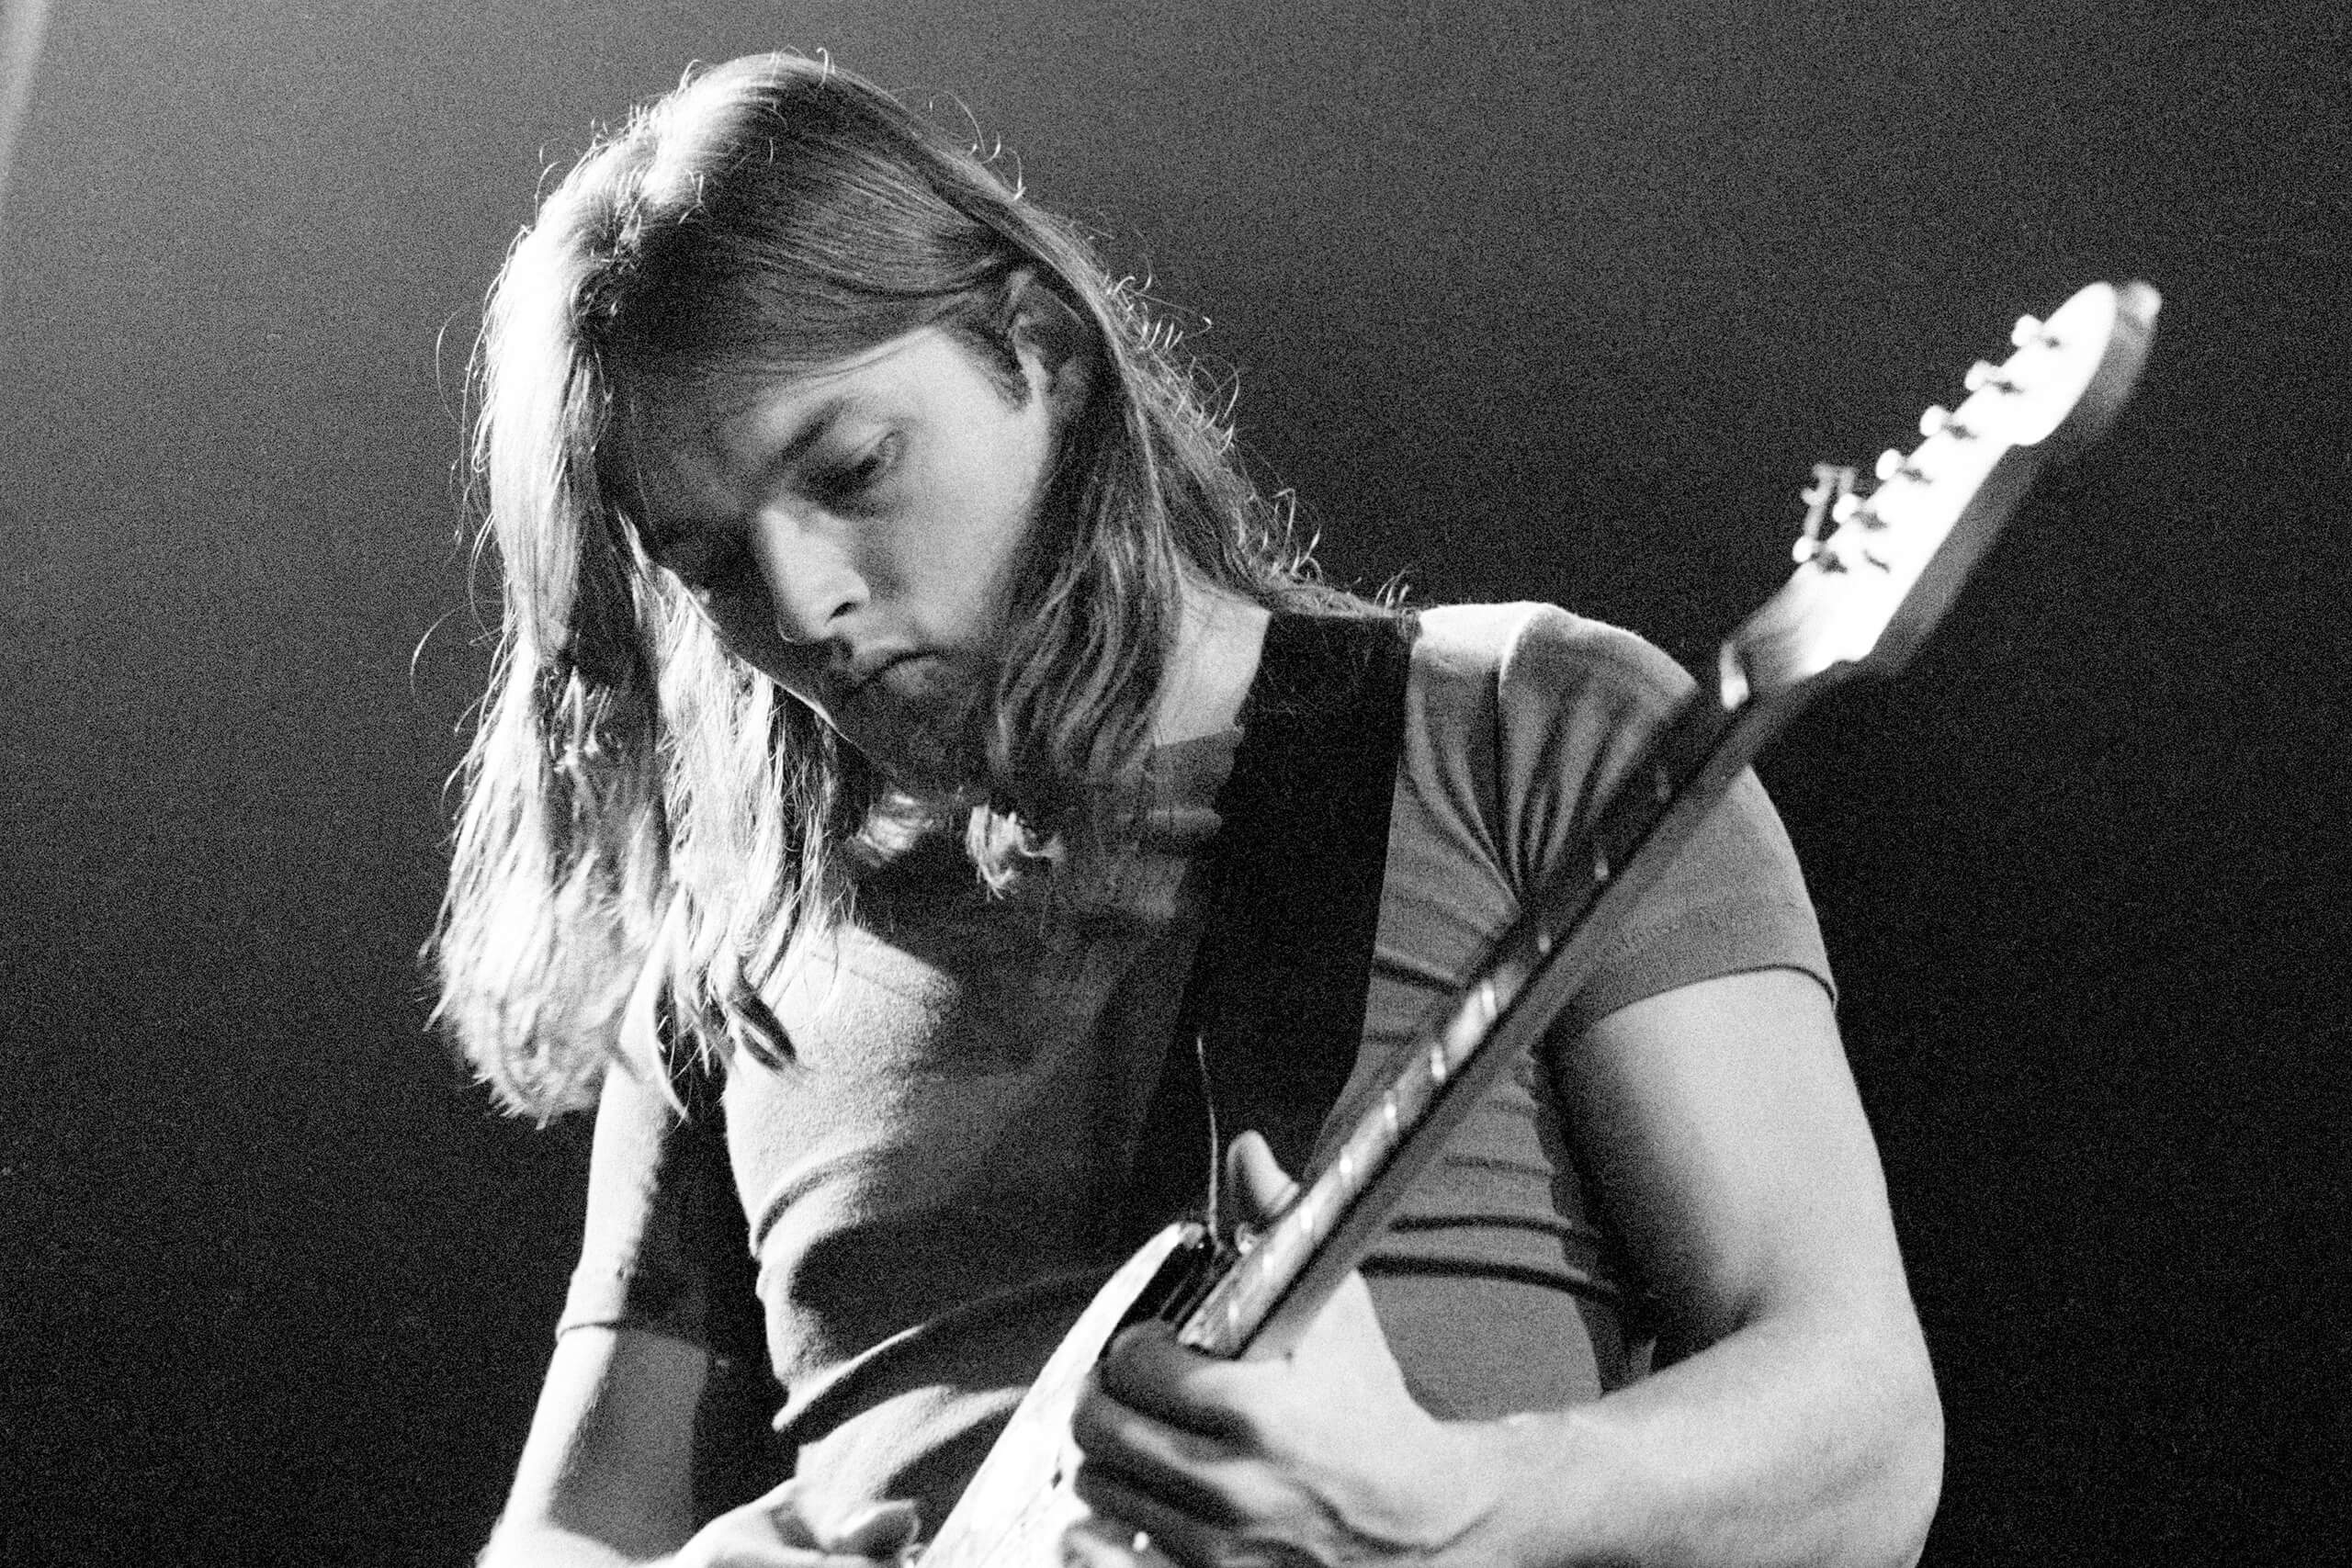 English Musician David Gilmour Net Worth, Career Struggle, and Personal Life. Everything to know in 2022!